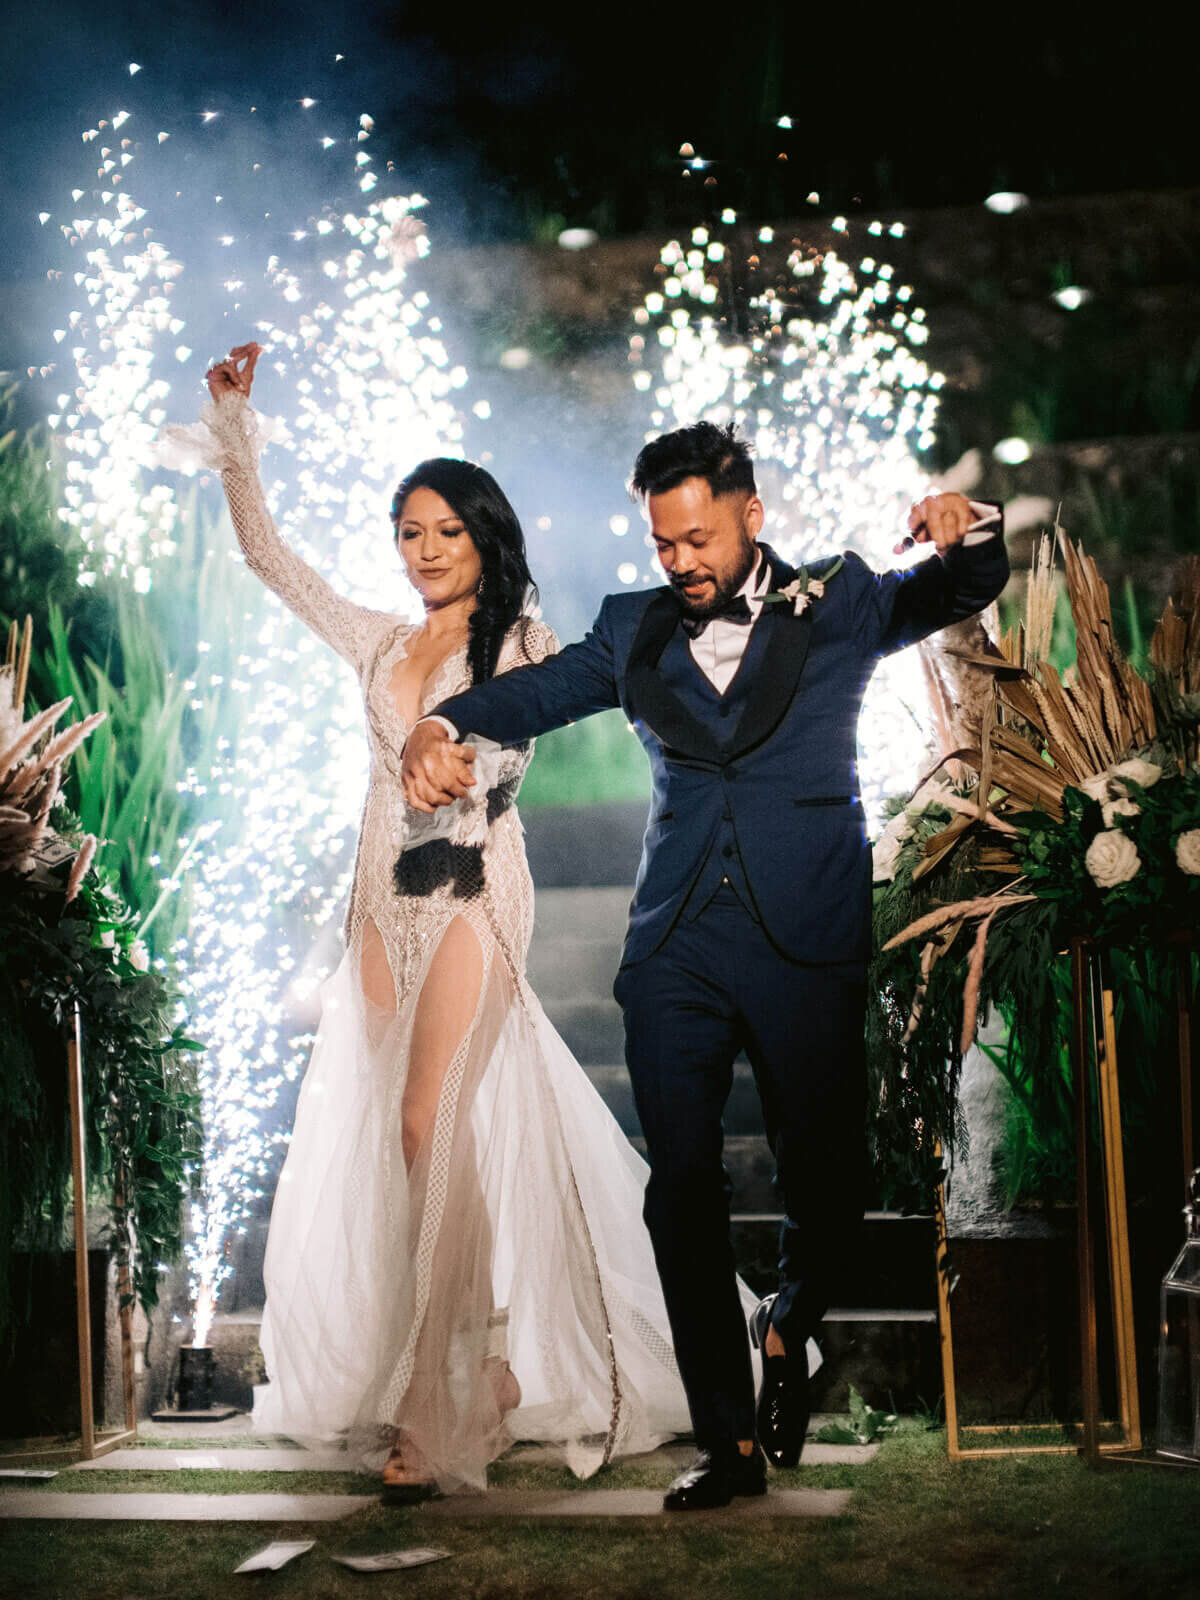 The newlyweds are dancing, with fireworks in the background, in Khayangan Estate, Bali, Indonesia. Image by Jenny Fu Studio